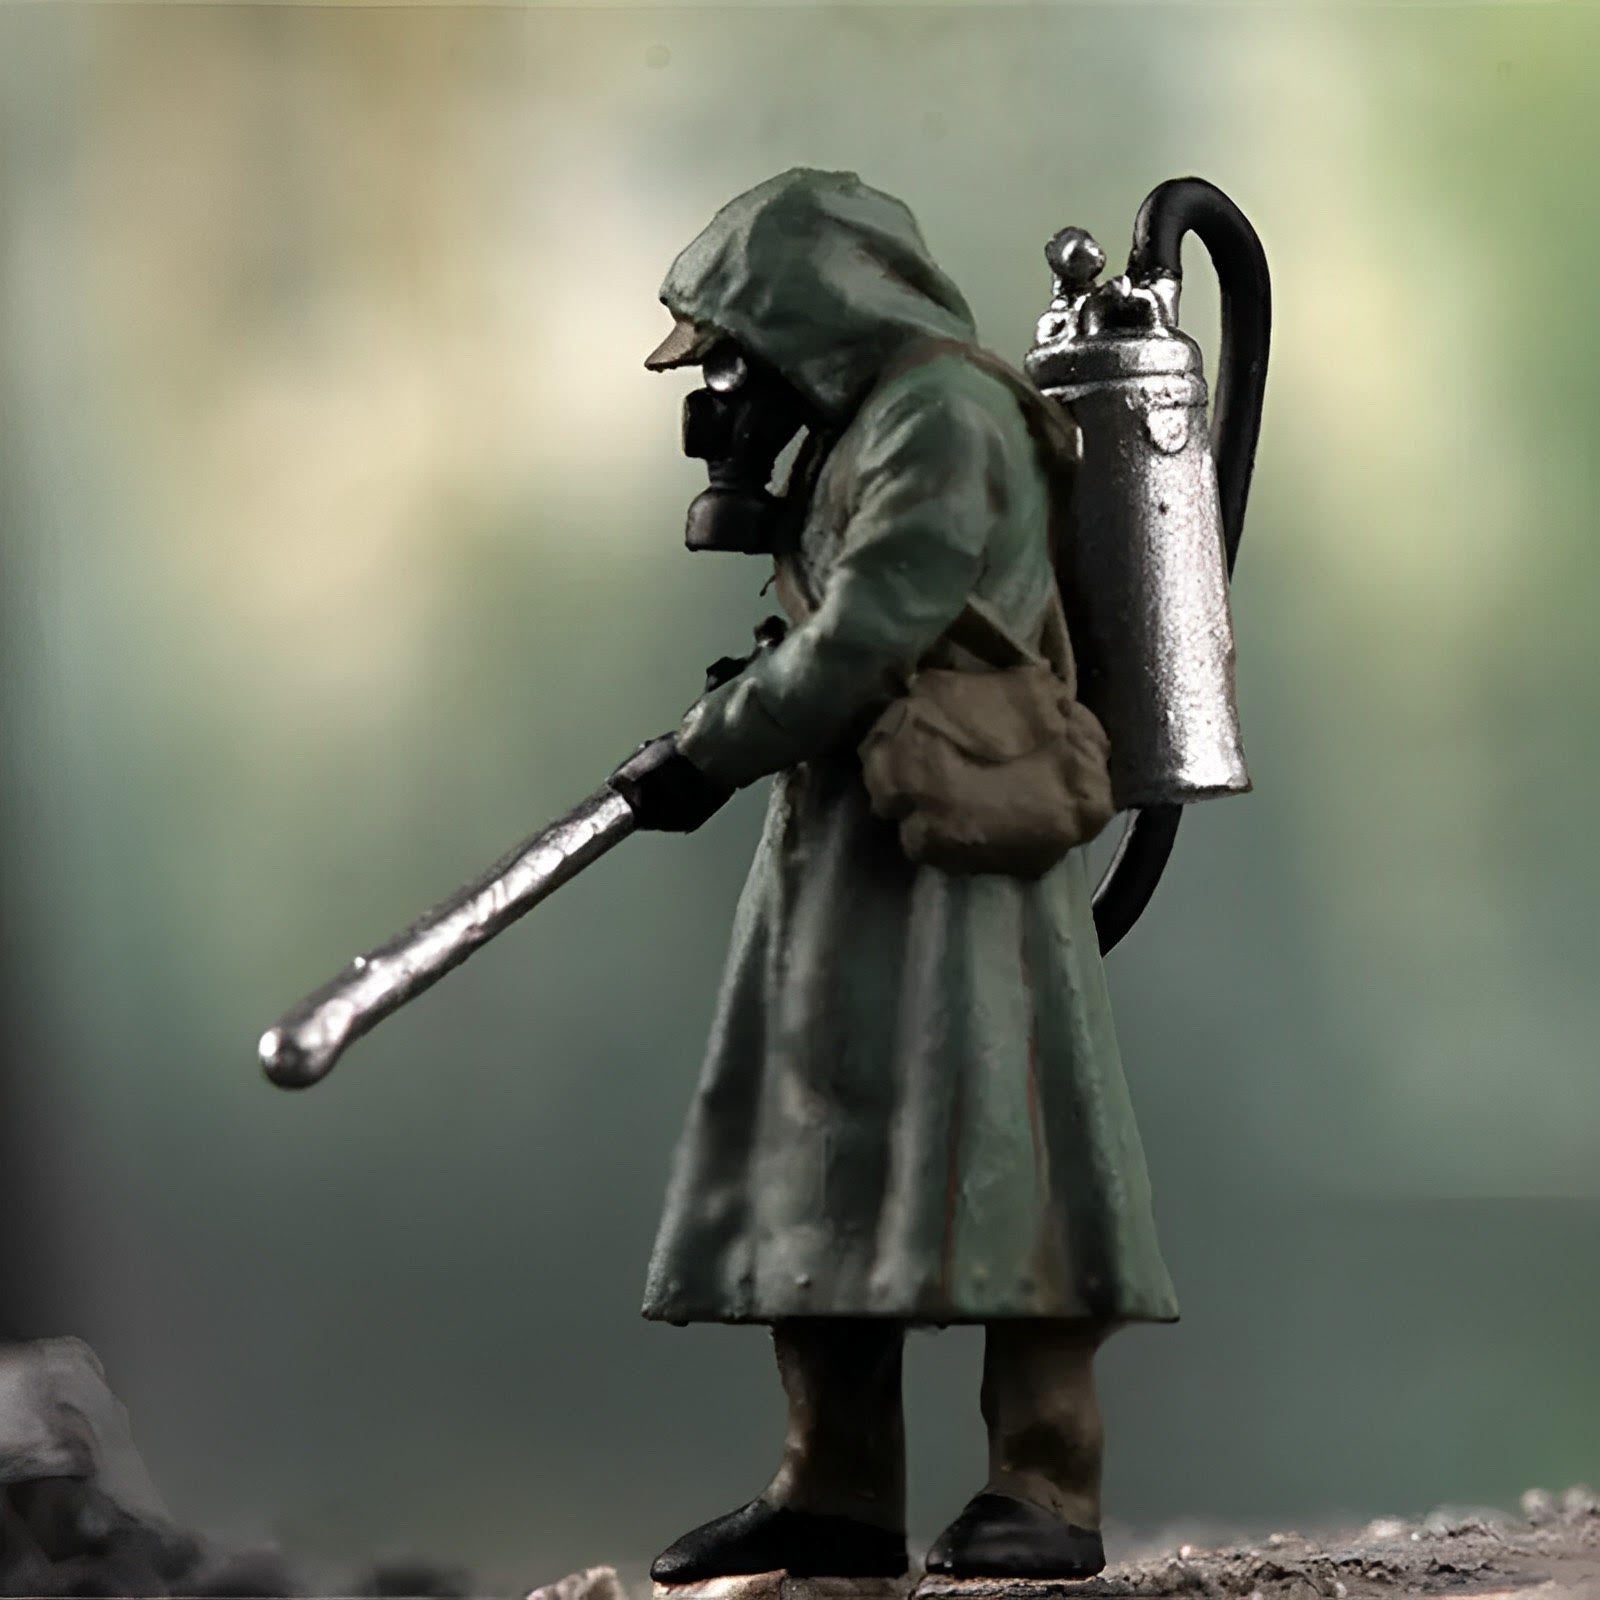 1/72 Scale Chernobyl Biochemical Soldier Figure